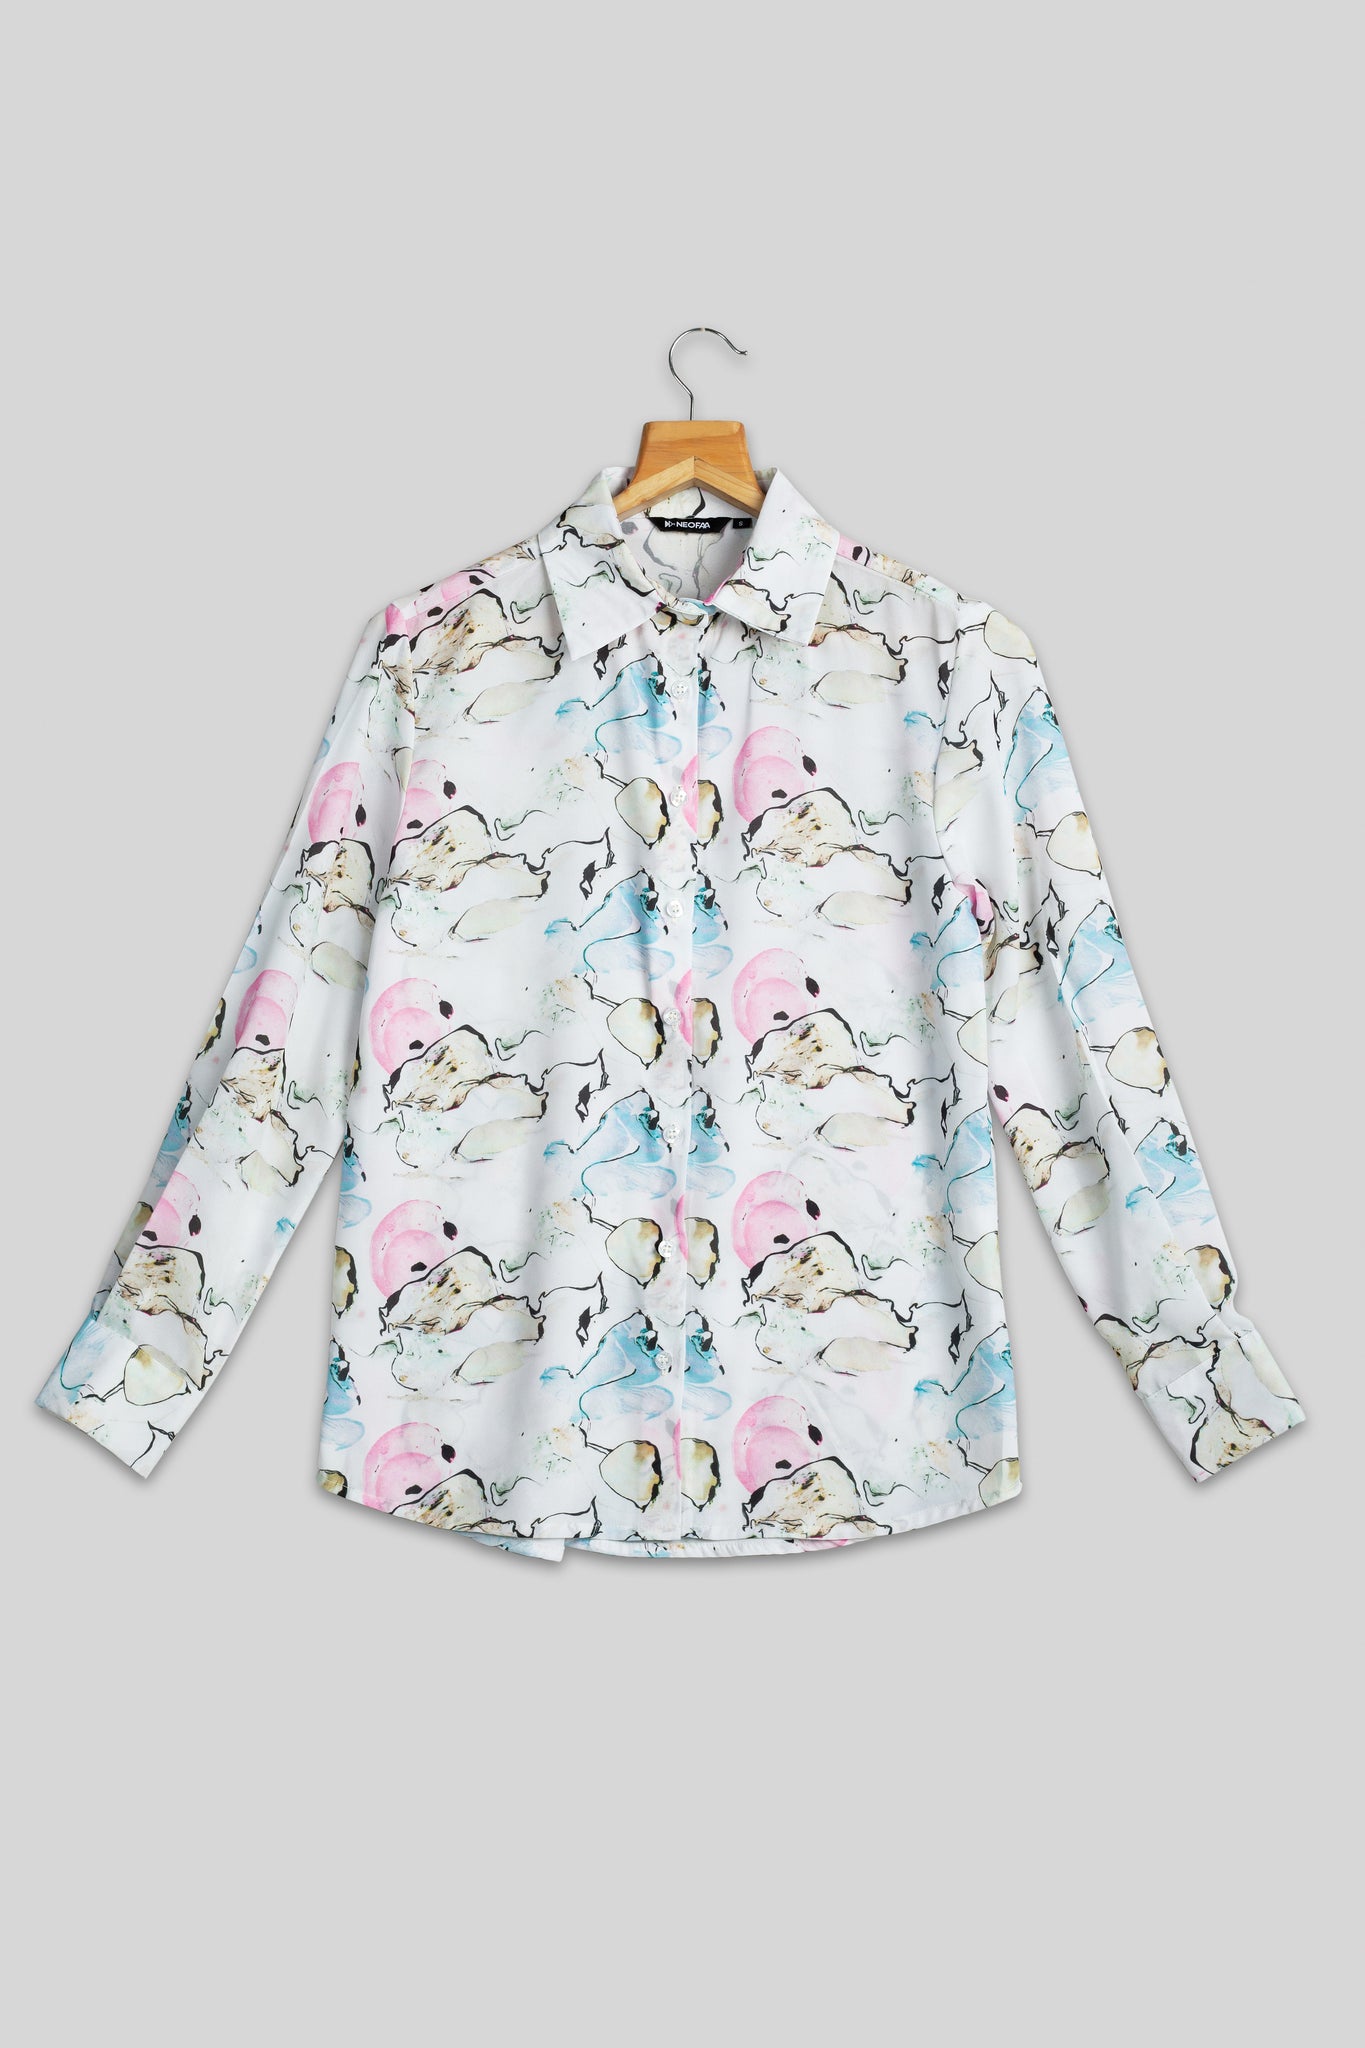 Abstract Floral Shirt For Women